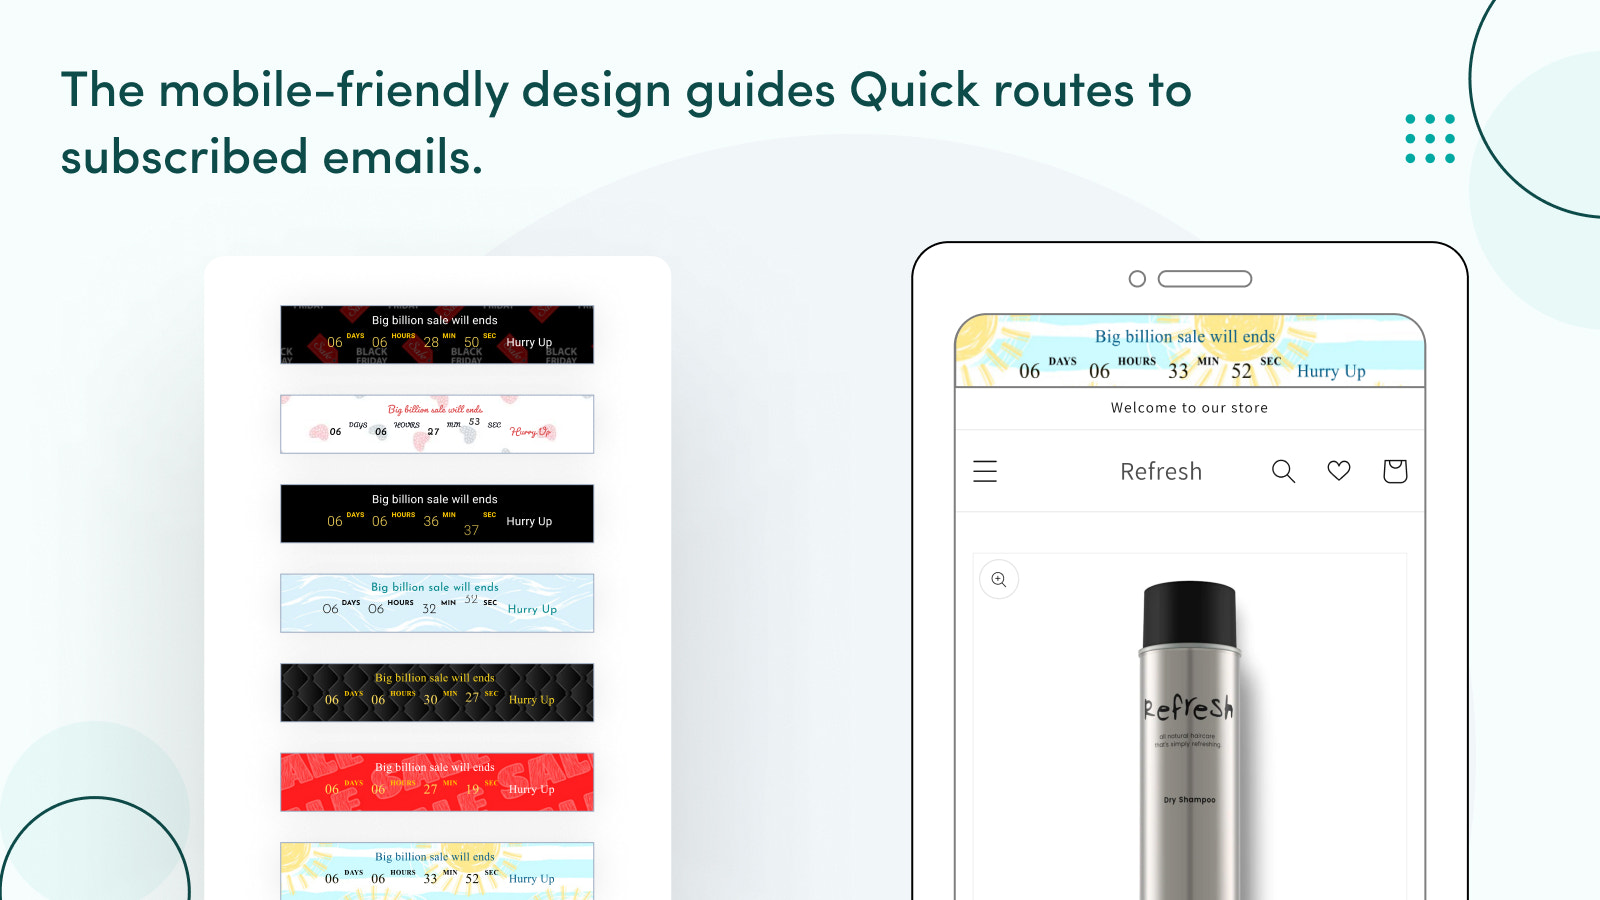 Mobile-friendly design helps with Quick routes to emails.